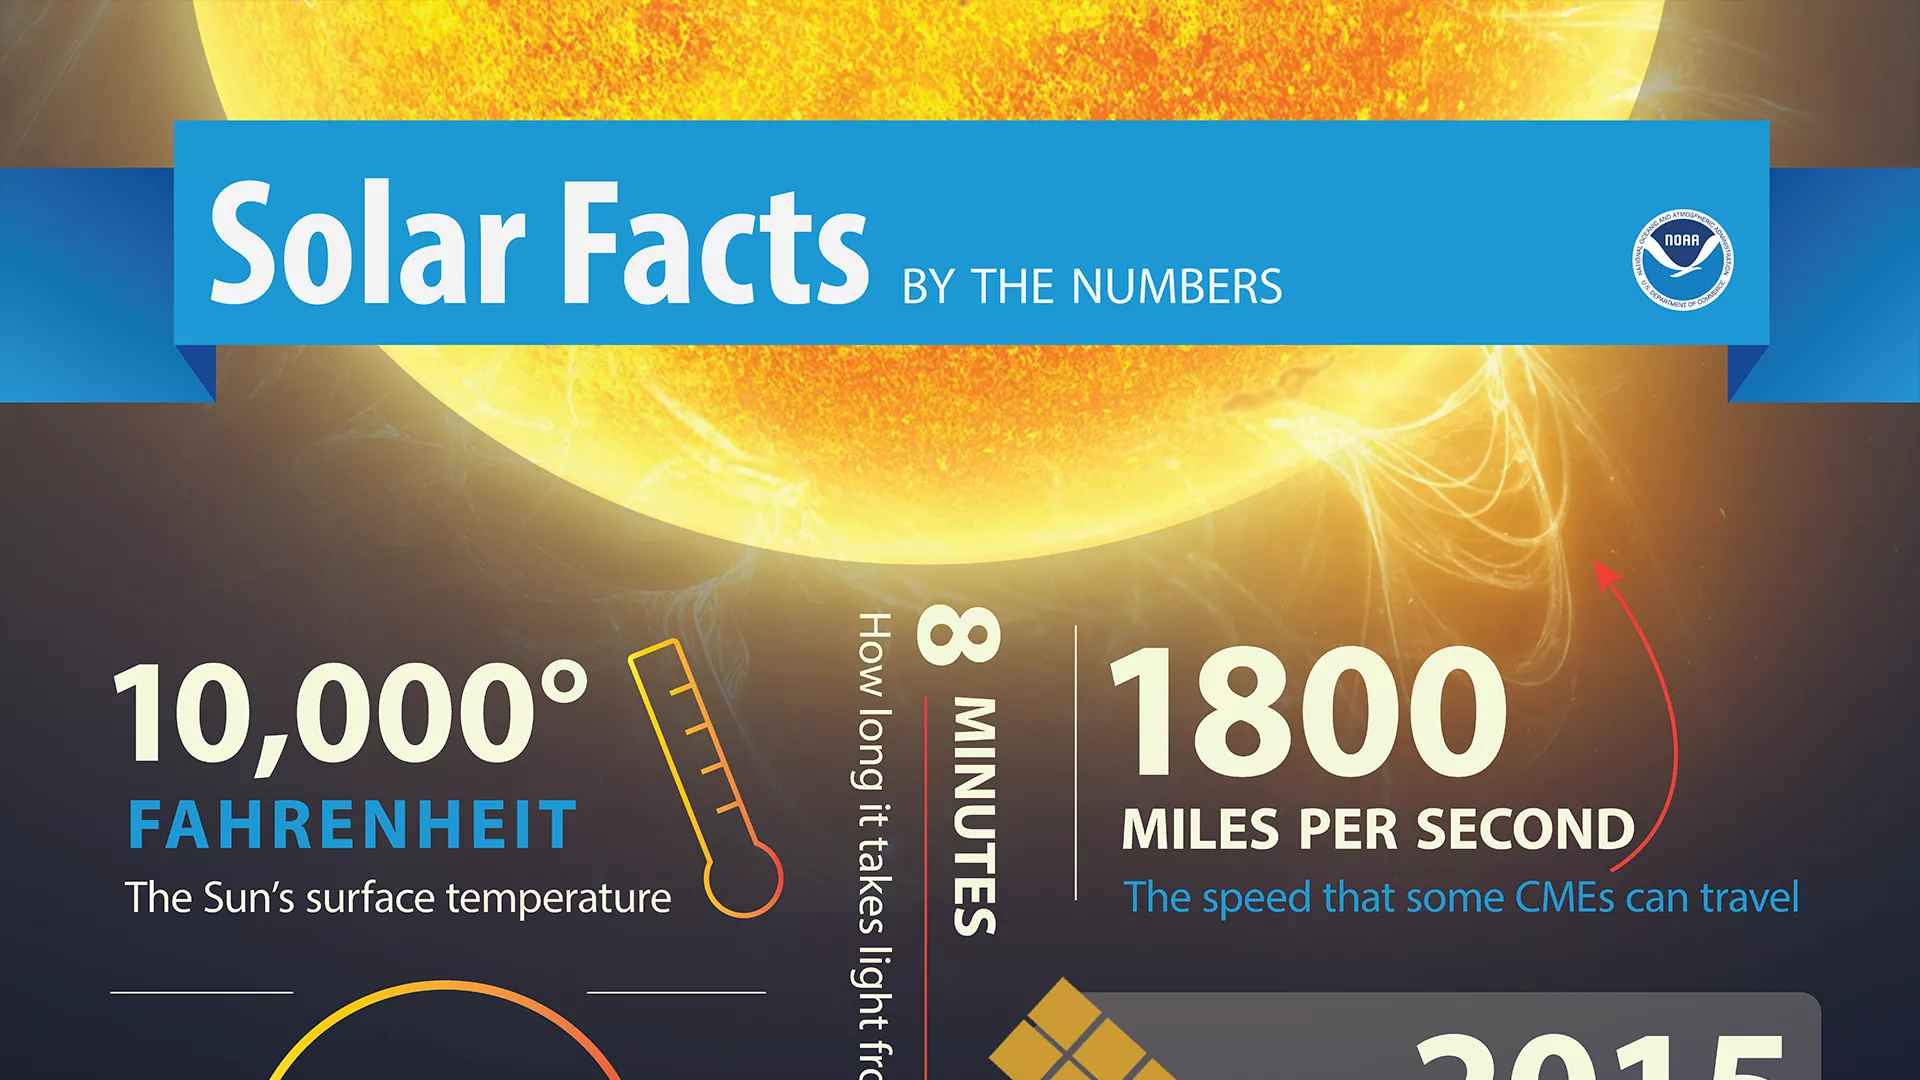 Graphic image which has several facts about solar weather